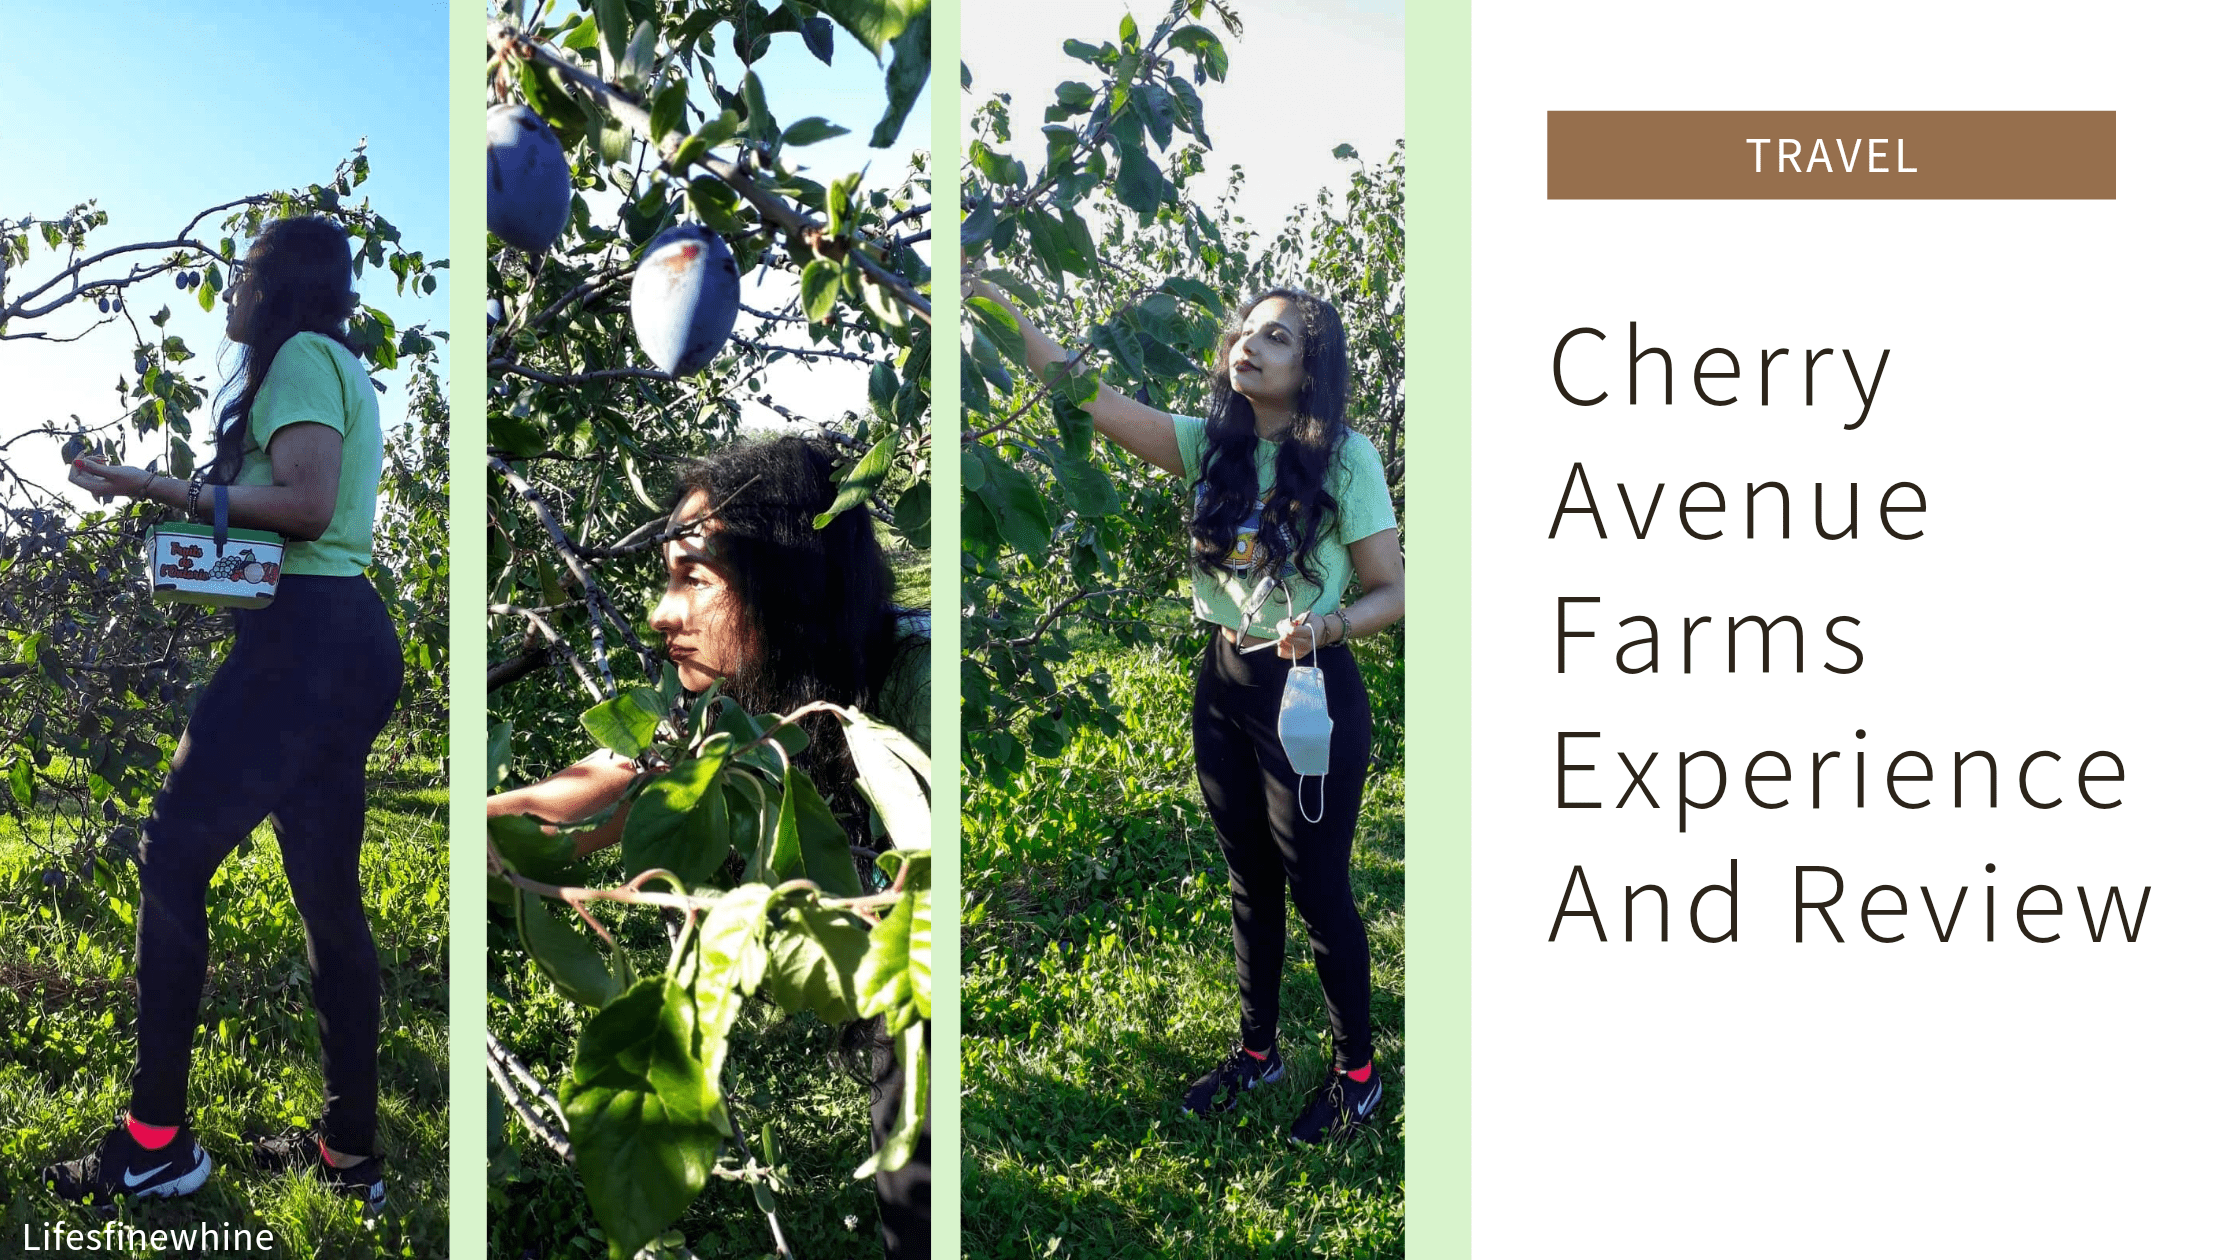 Cherry Avenue Farms Experience/Review